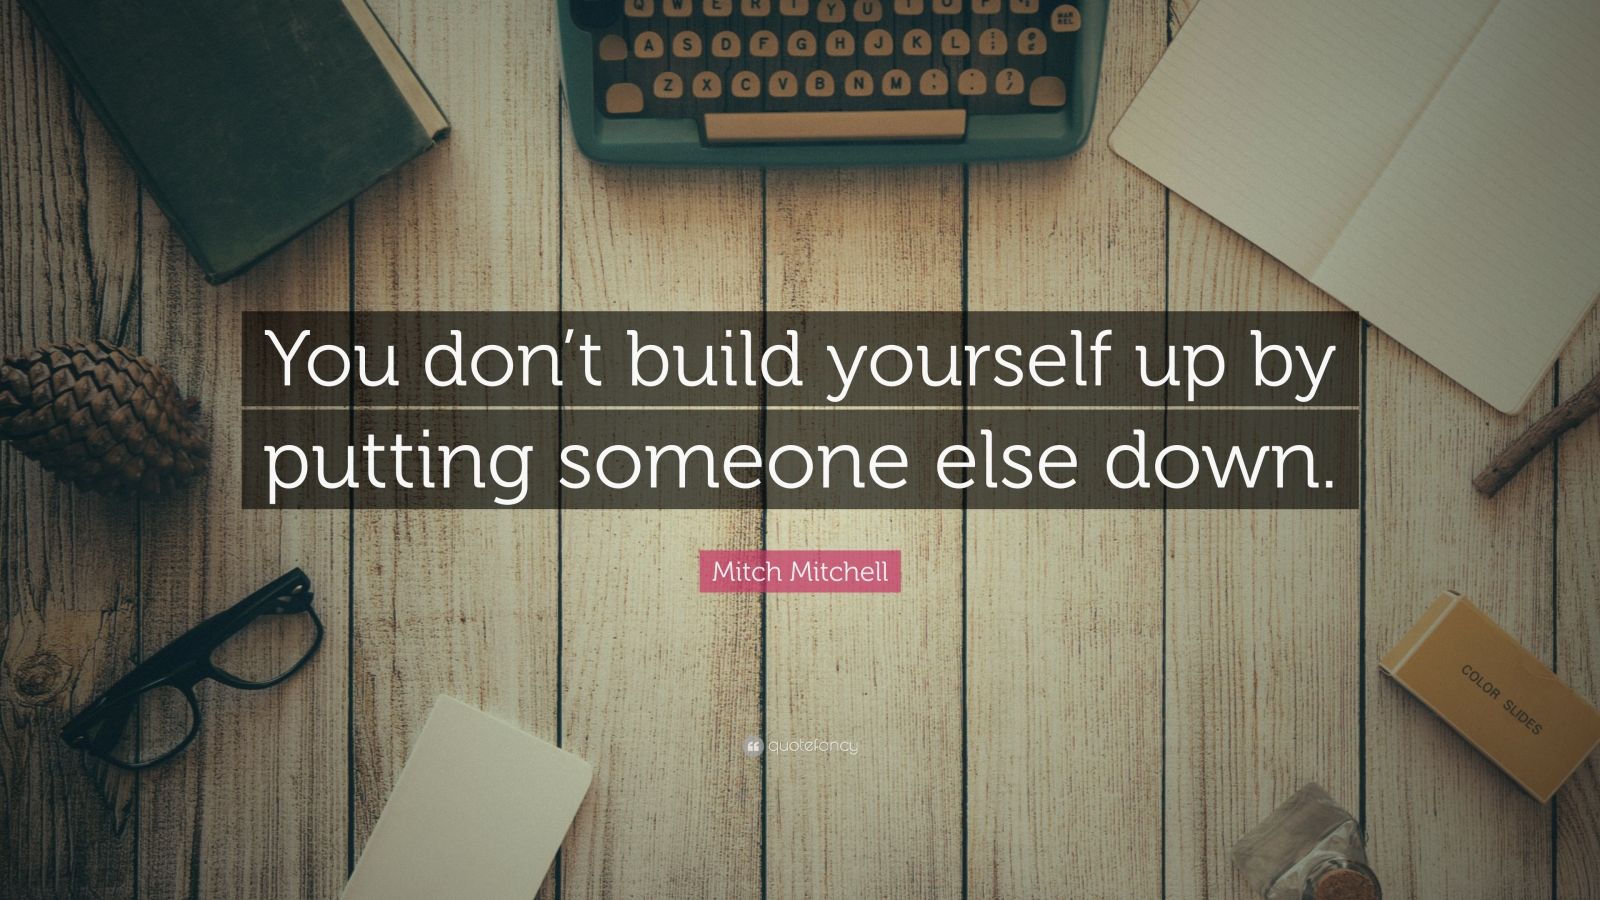 Mitch Mitchell Quote: “You don’t build yourself up by putting someone